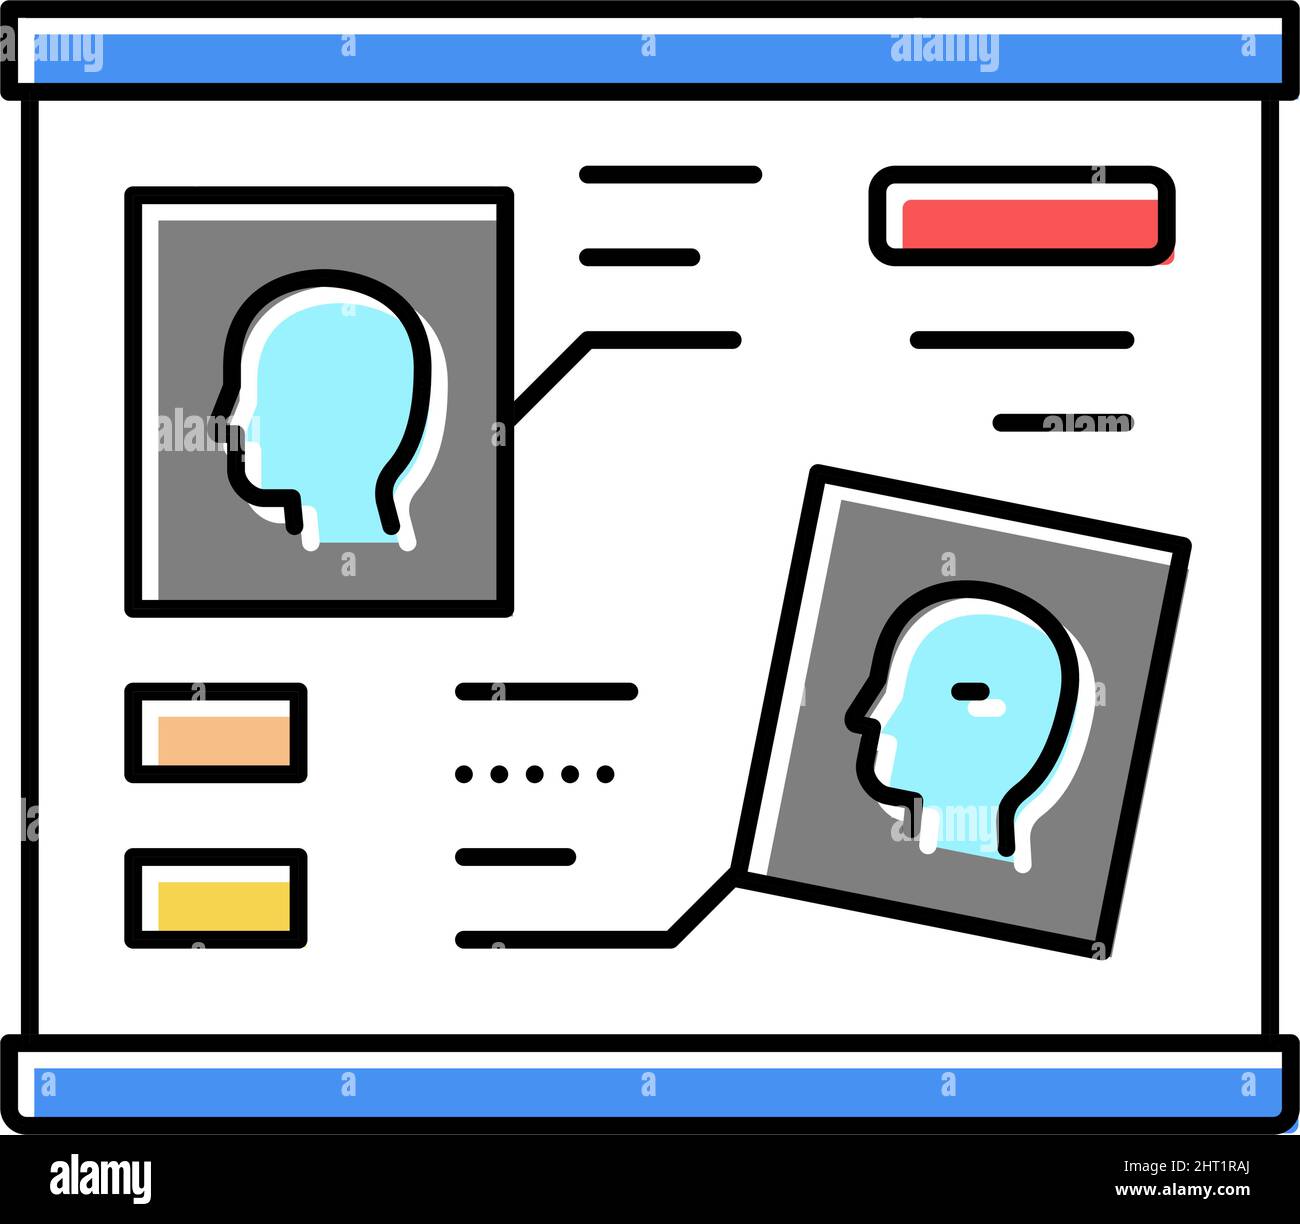 human head researching radiology cadre color icon vector illustration Stock Vector